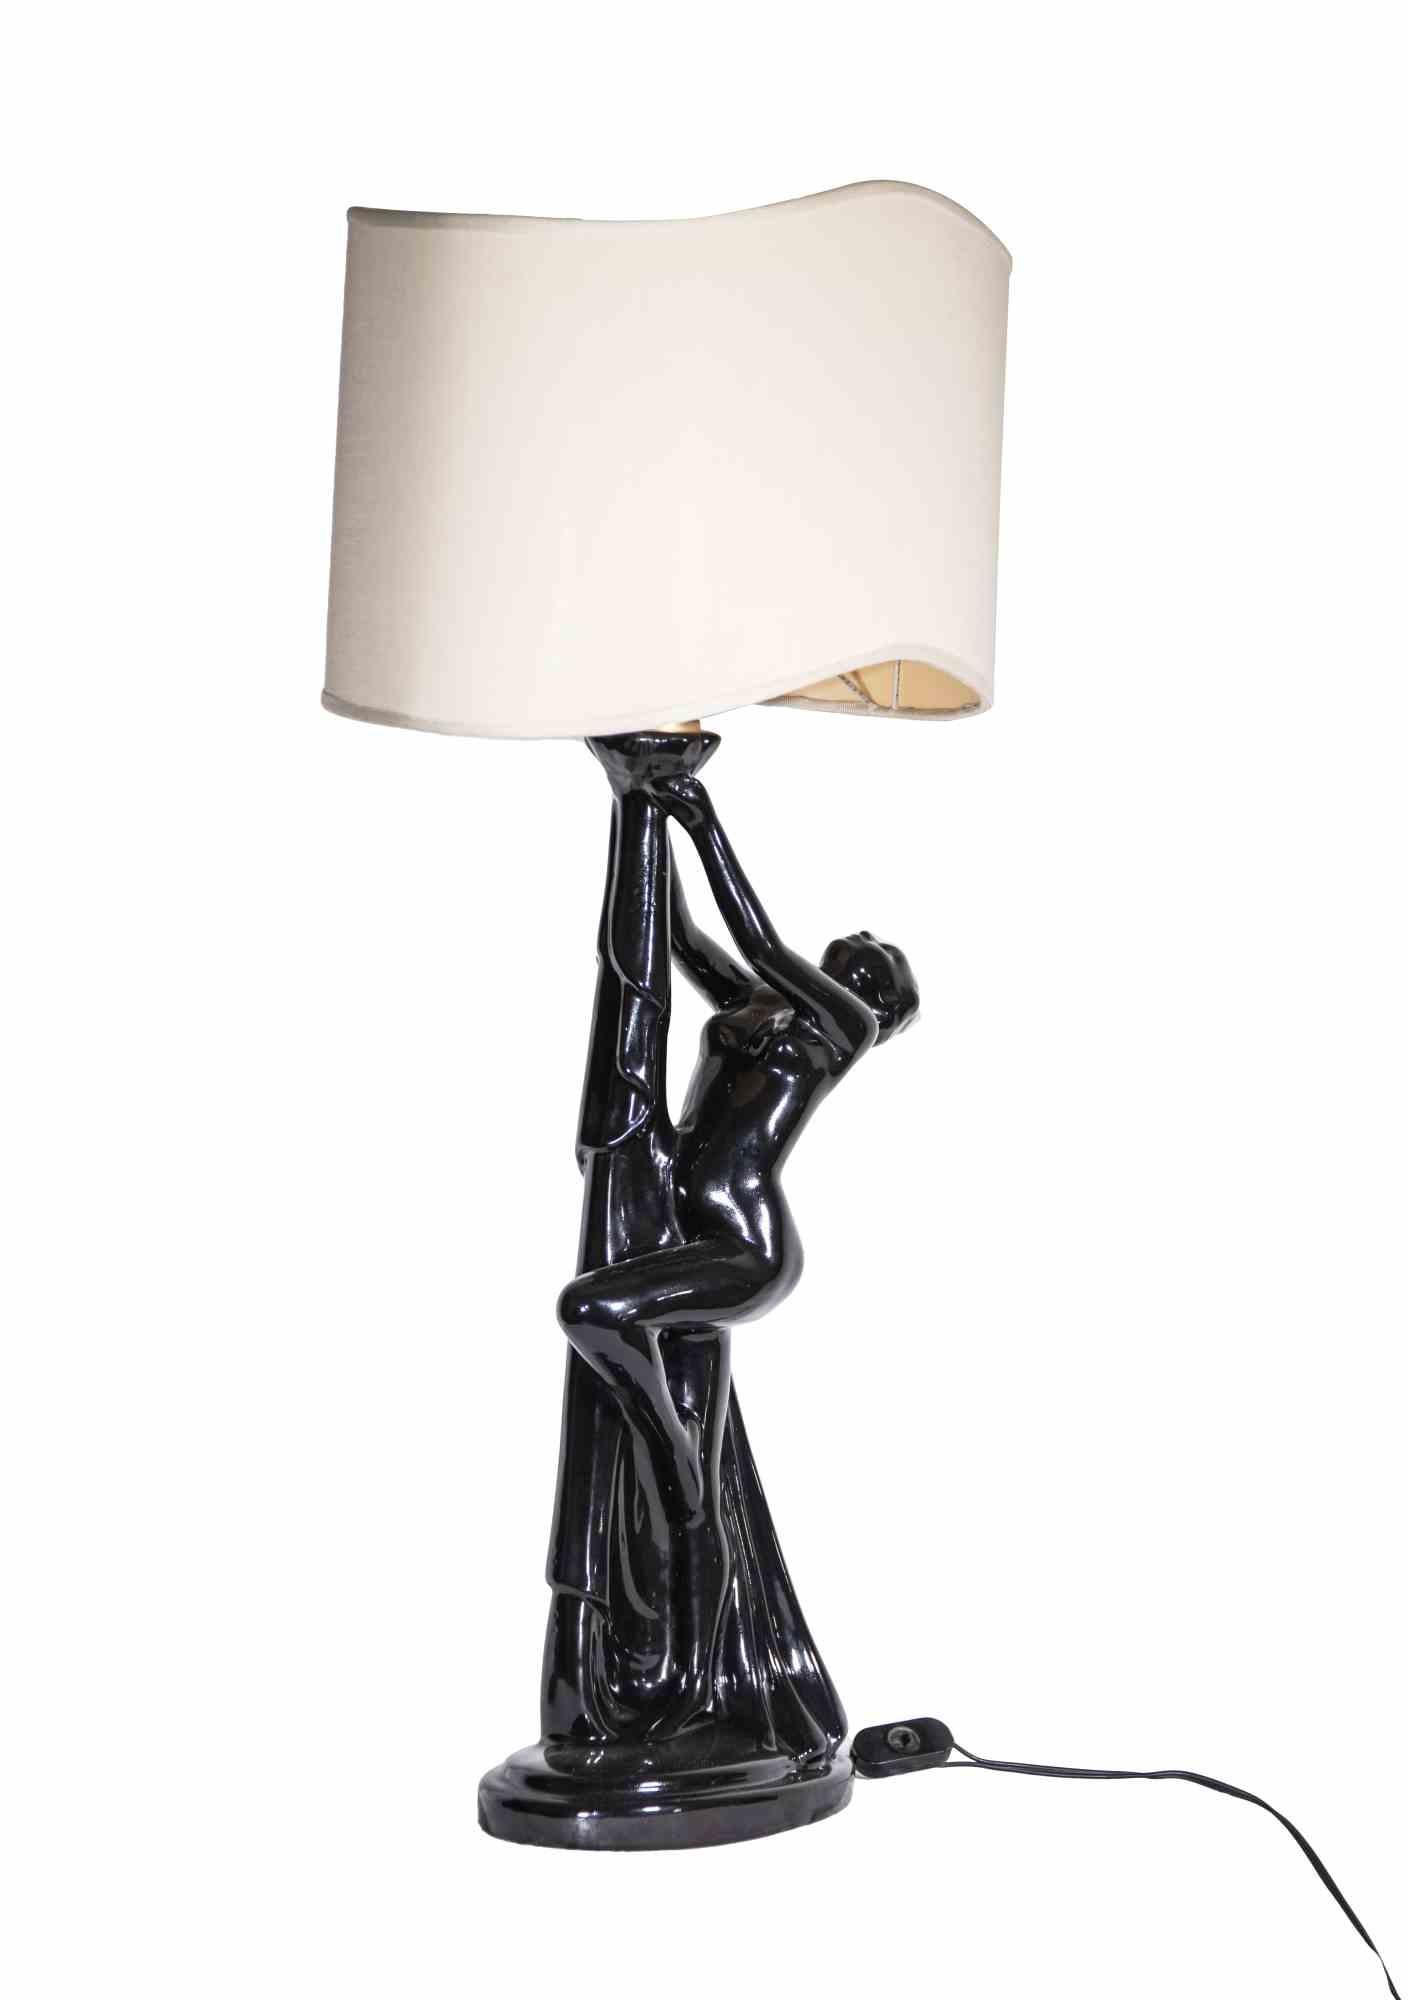 Italian Vintage Ceramic Table Lamp by Tommaso Barbi, Italy, 1970s For Sale